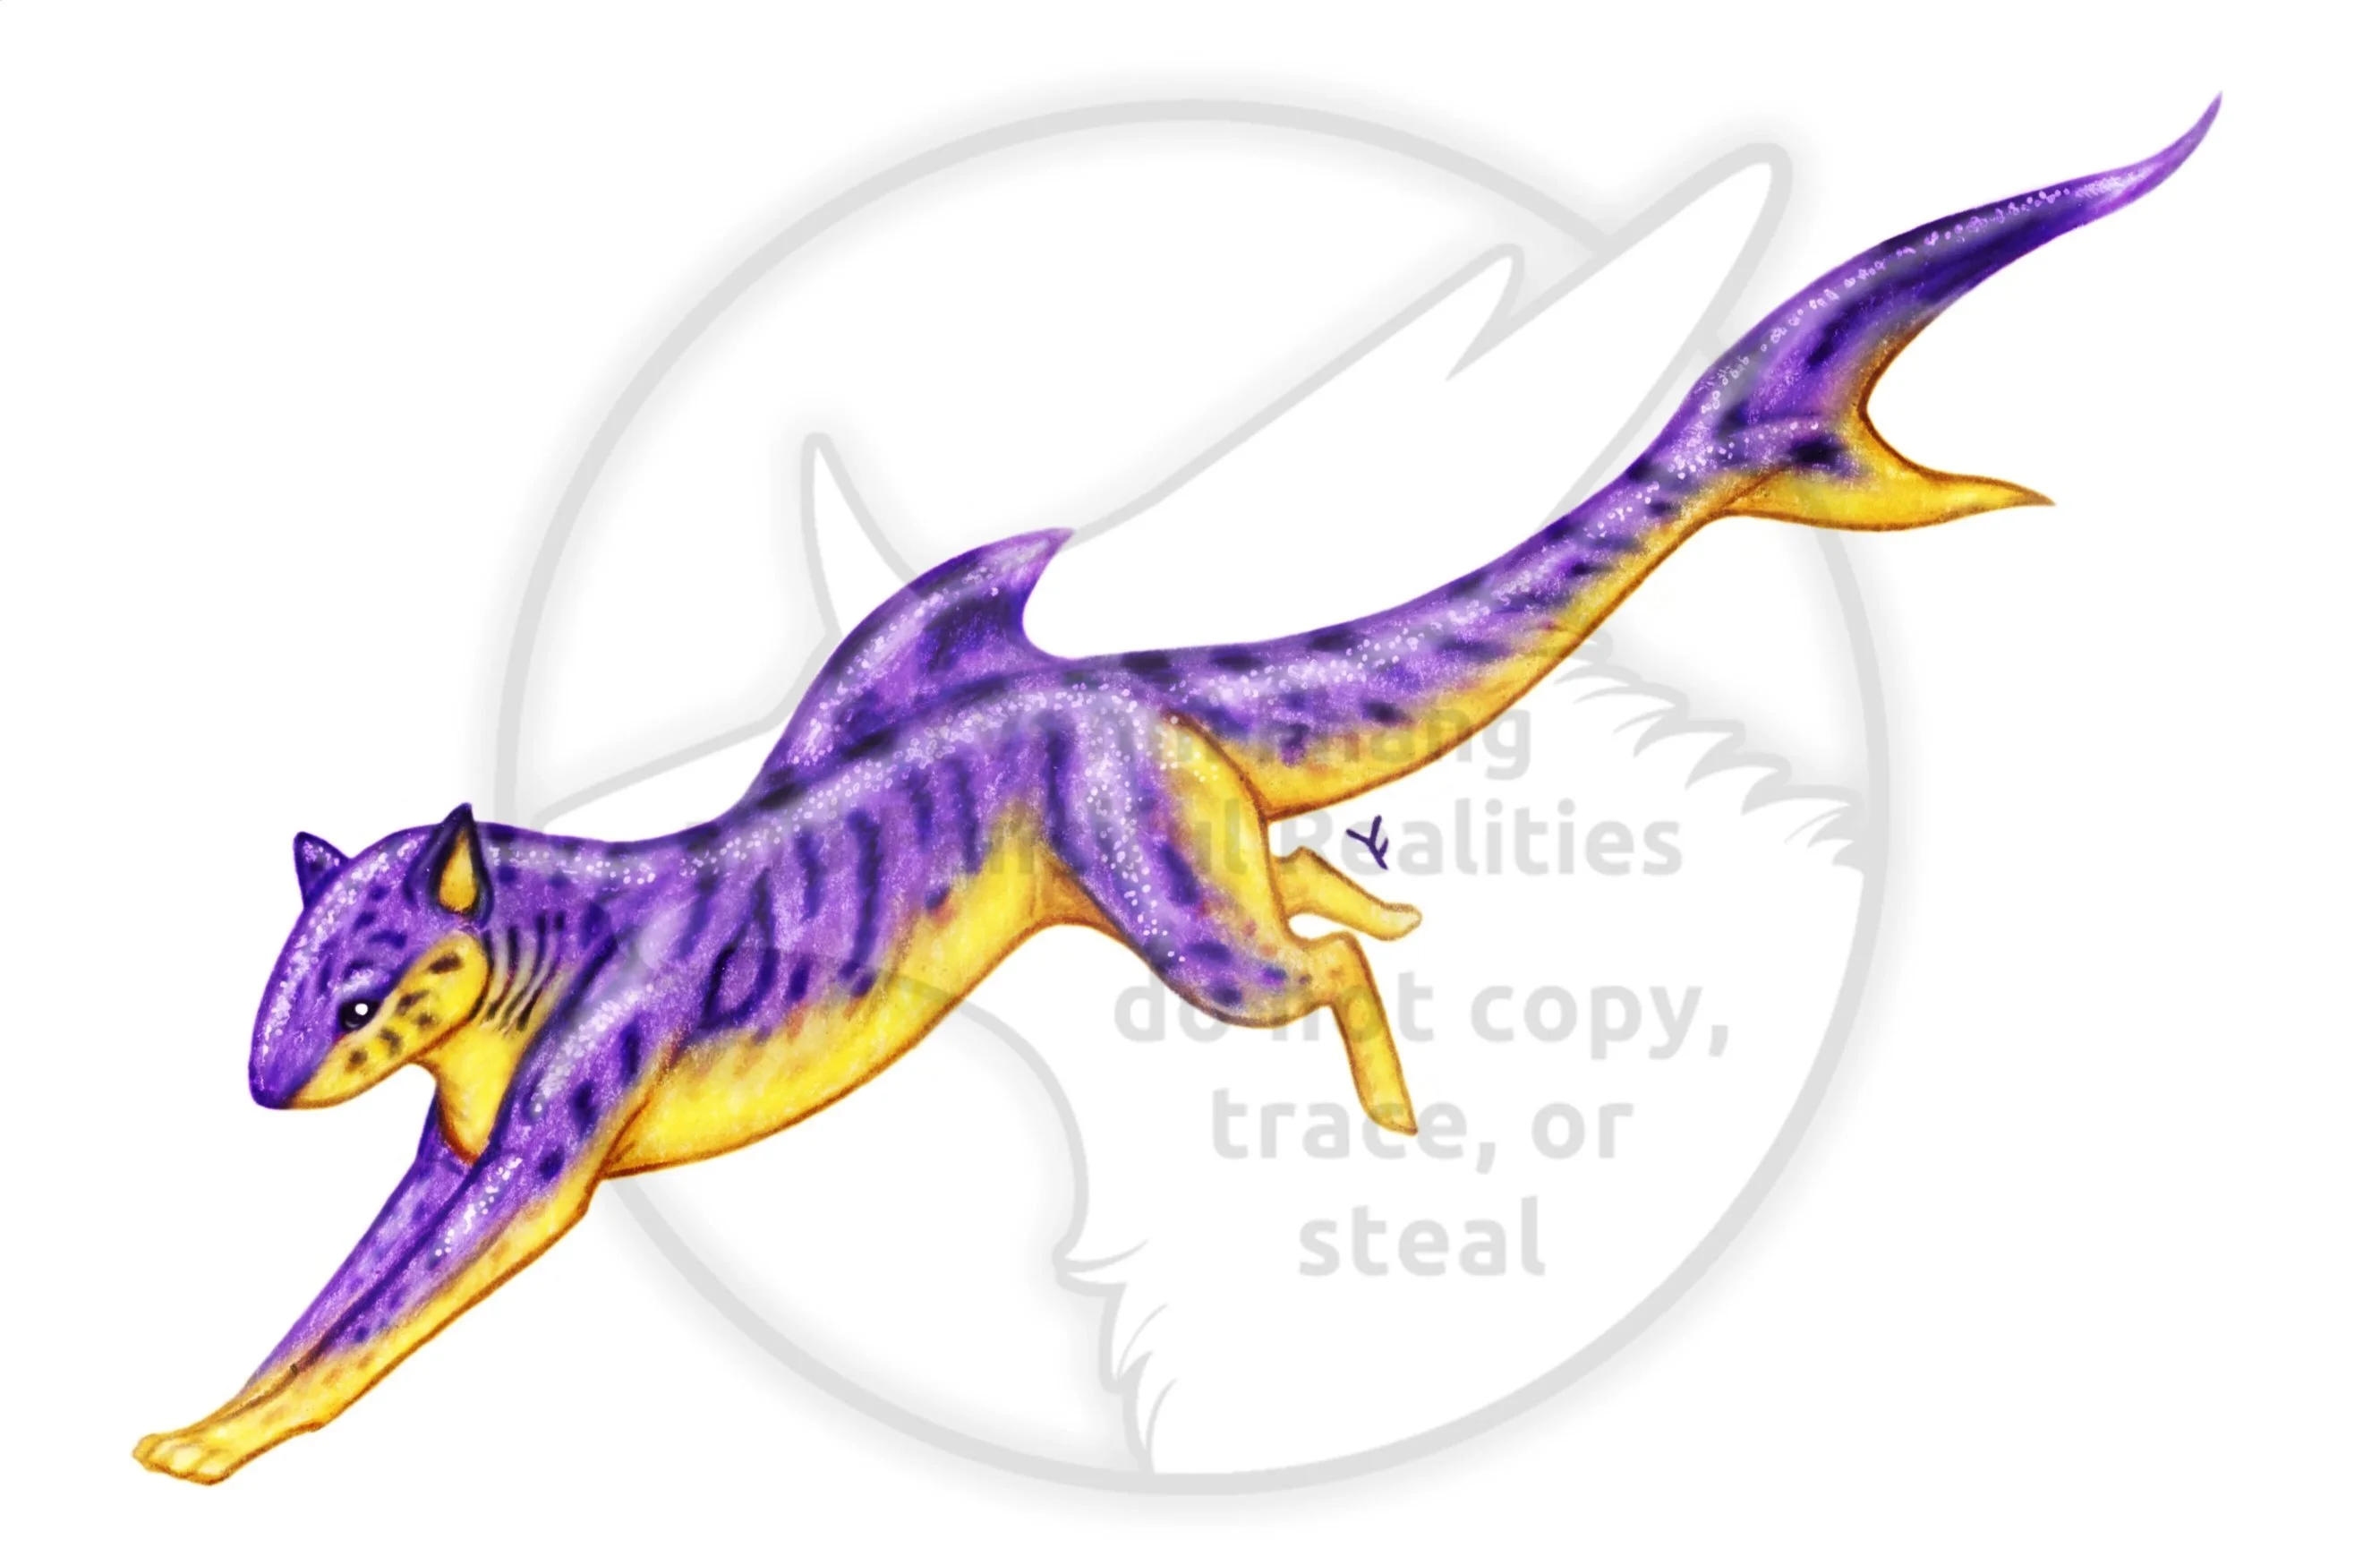 A hybrid animal, a purple tiger shark and a yellow tabby cat.